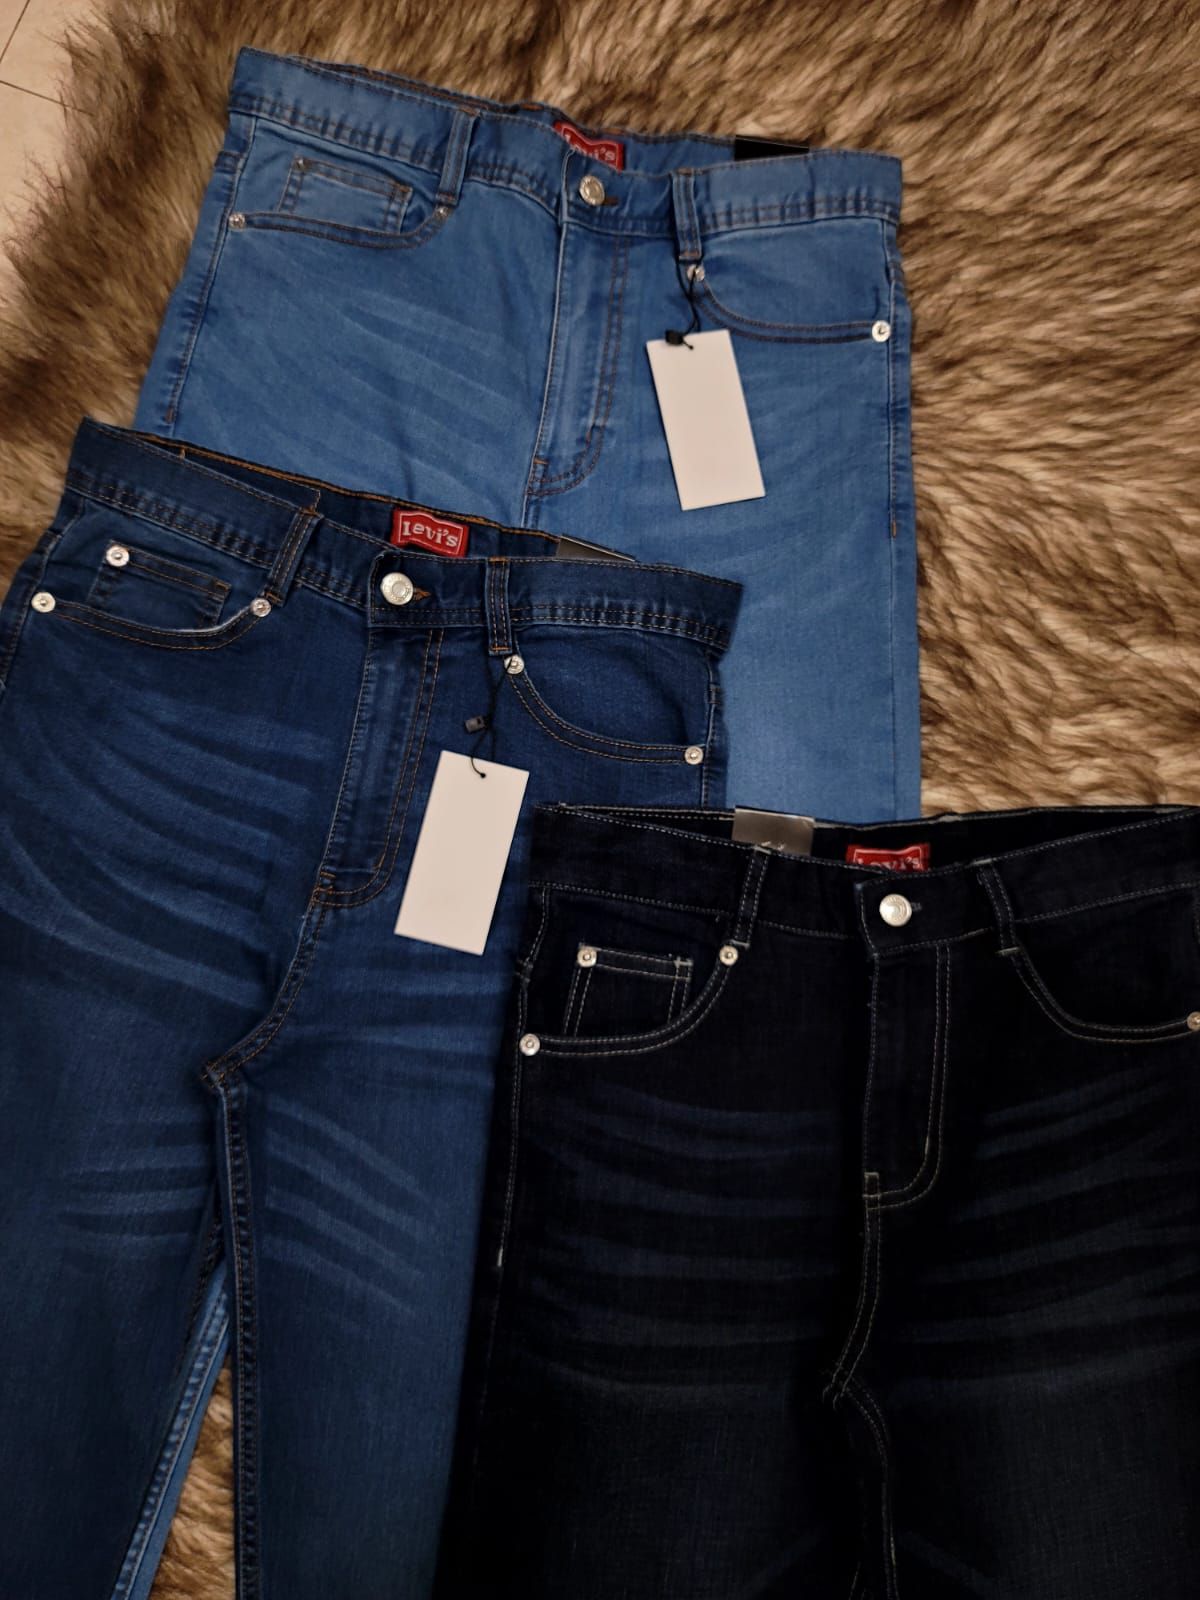 Buy Levis Jeans at Best Prices Online in Bangladesh 